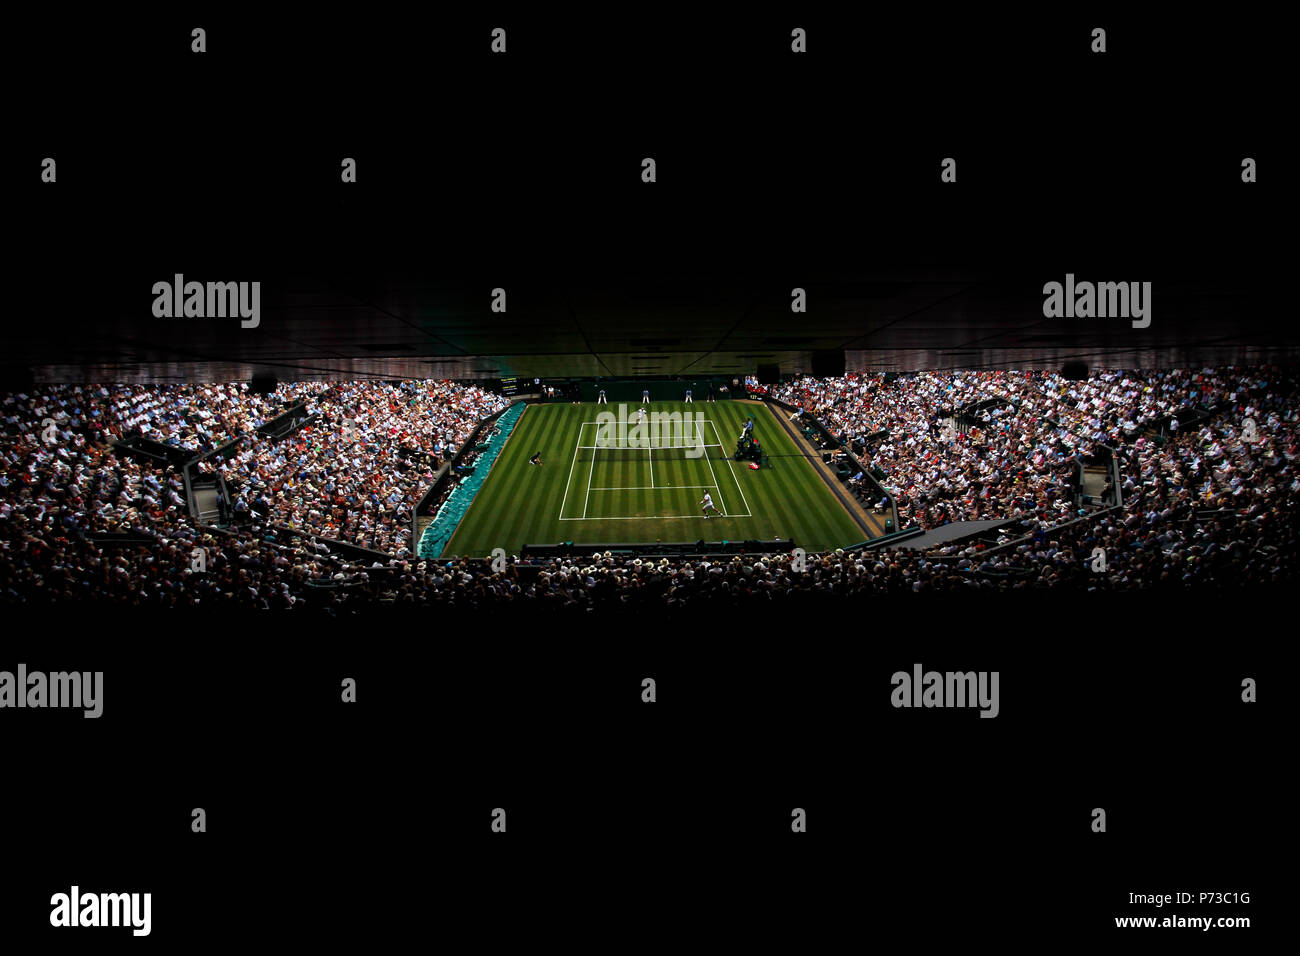 London, England - July 4th, 2018.  Wimbledon Tennis:  General view of Centre Court during Roger Federer's second round match against Lukas Lacko of Slovakia today at Wimbledon Credit: Adam Stoltman/Alamy Live News Stock Photo